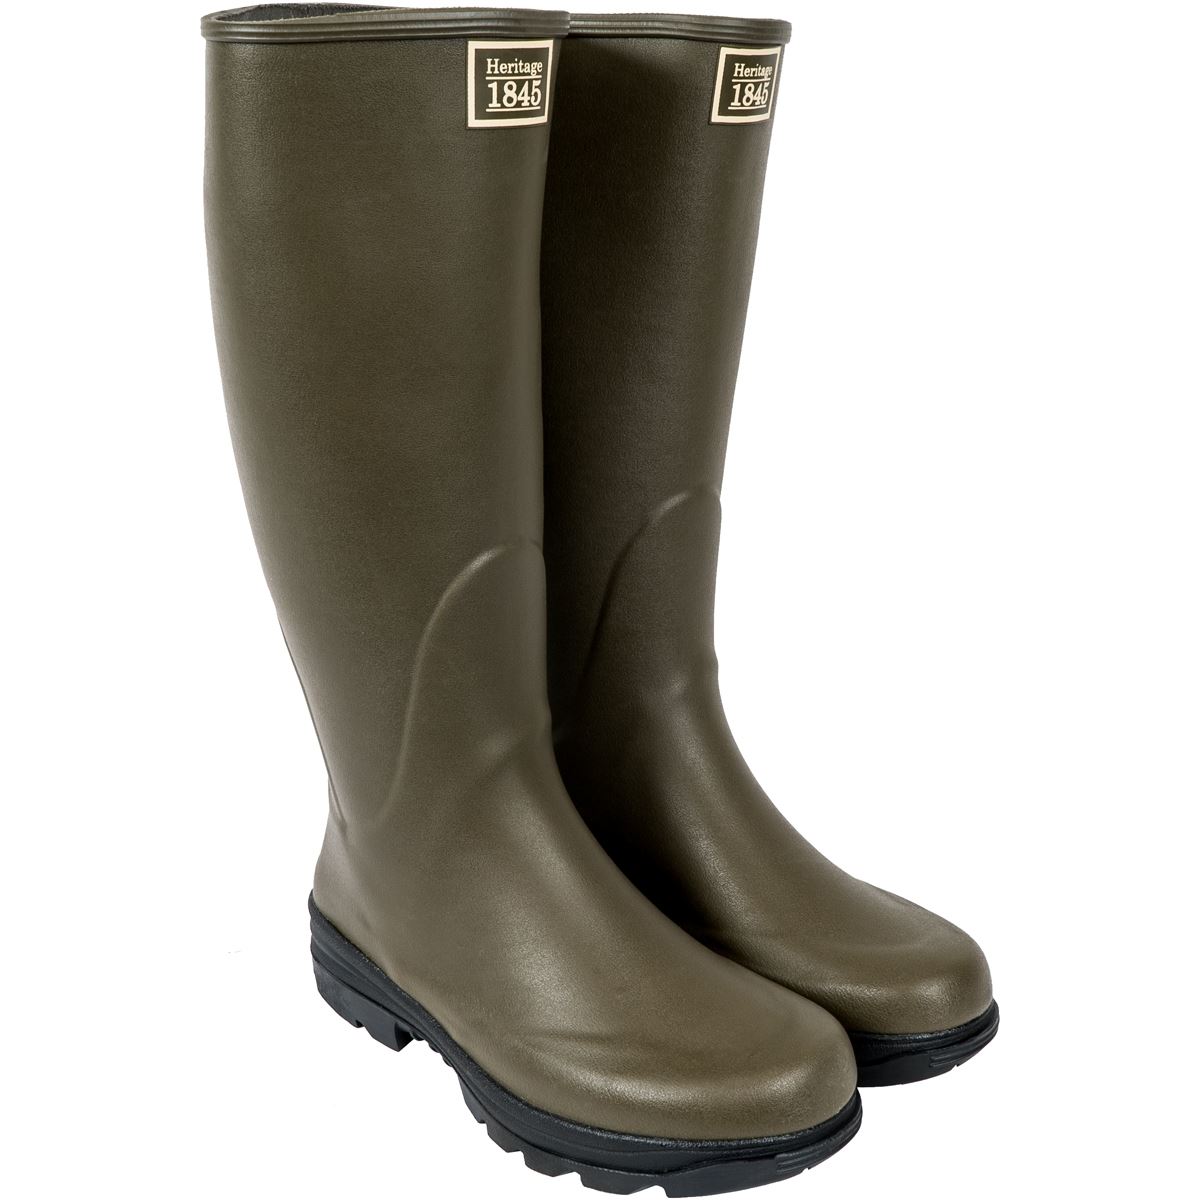 Heritage 1845 Unisex Dinedor Wellington Boots Questions & Answers